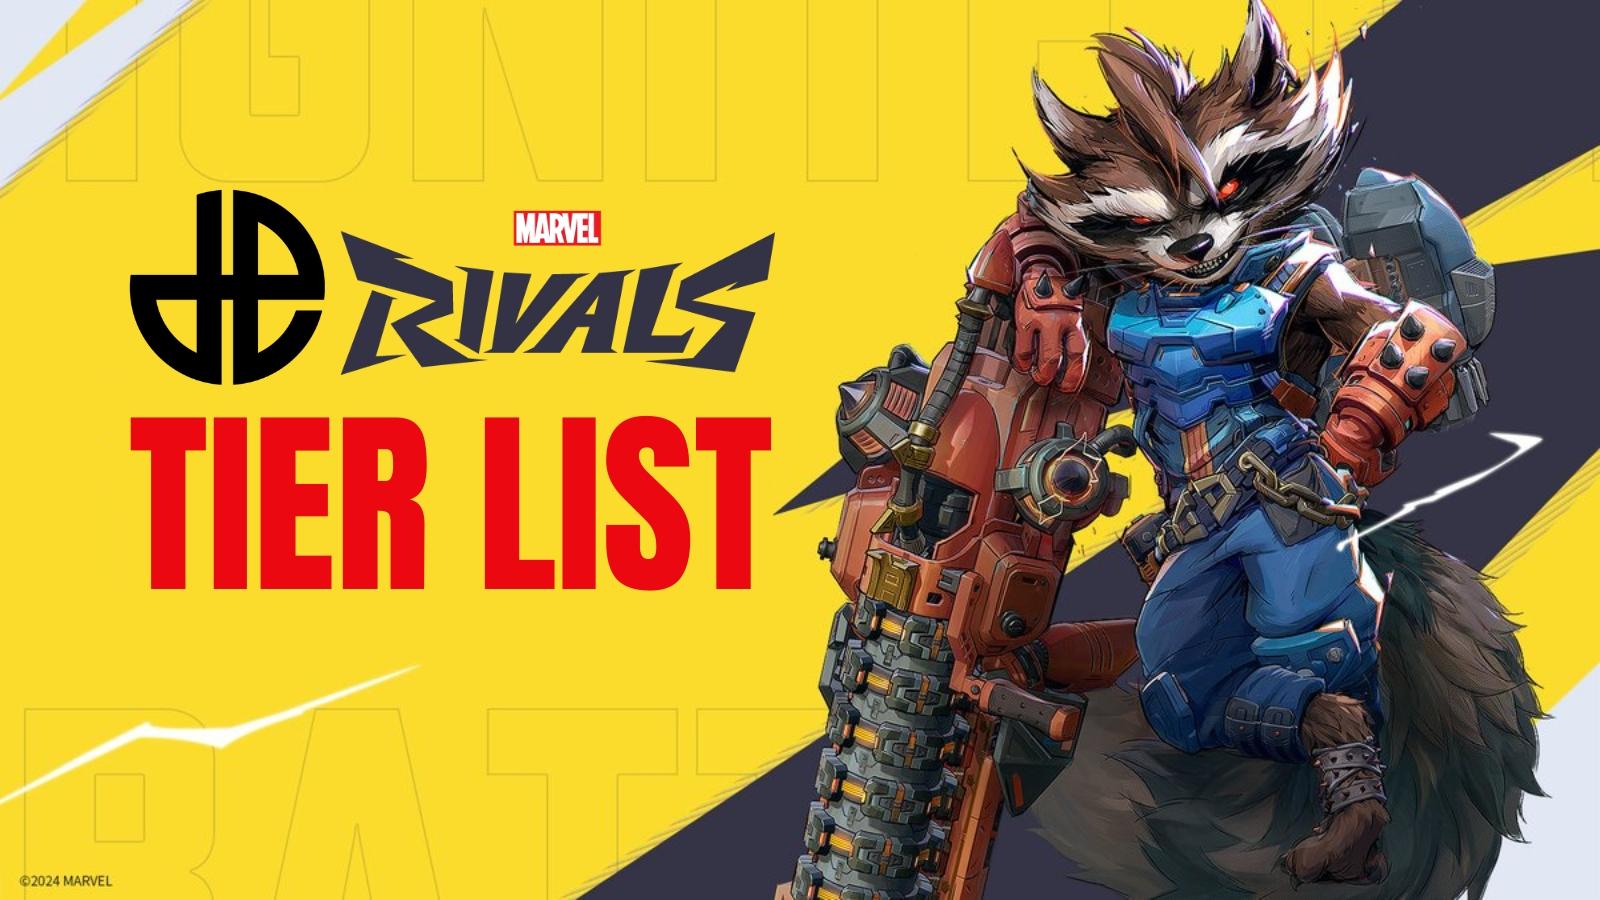 Marvel Rivals cover for Tier List with Rocket